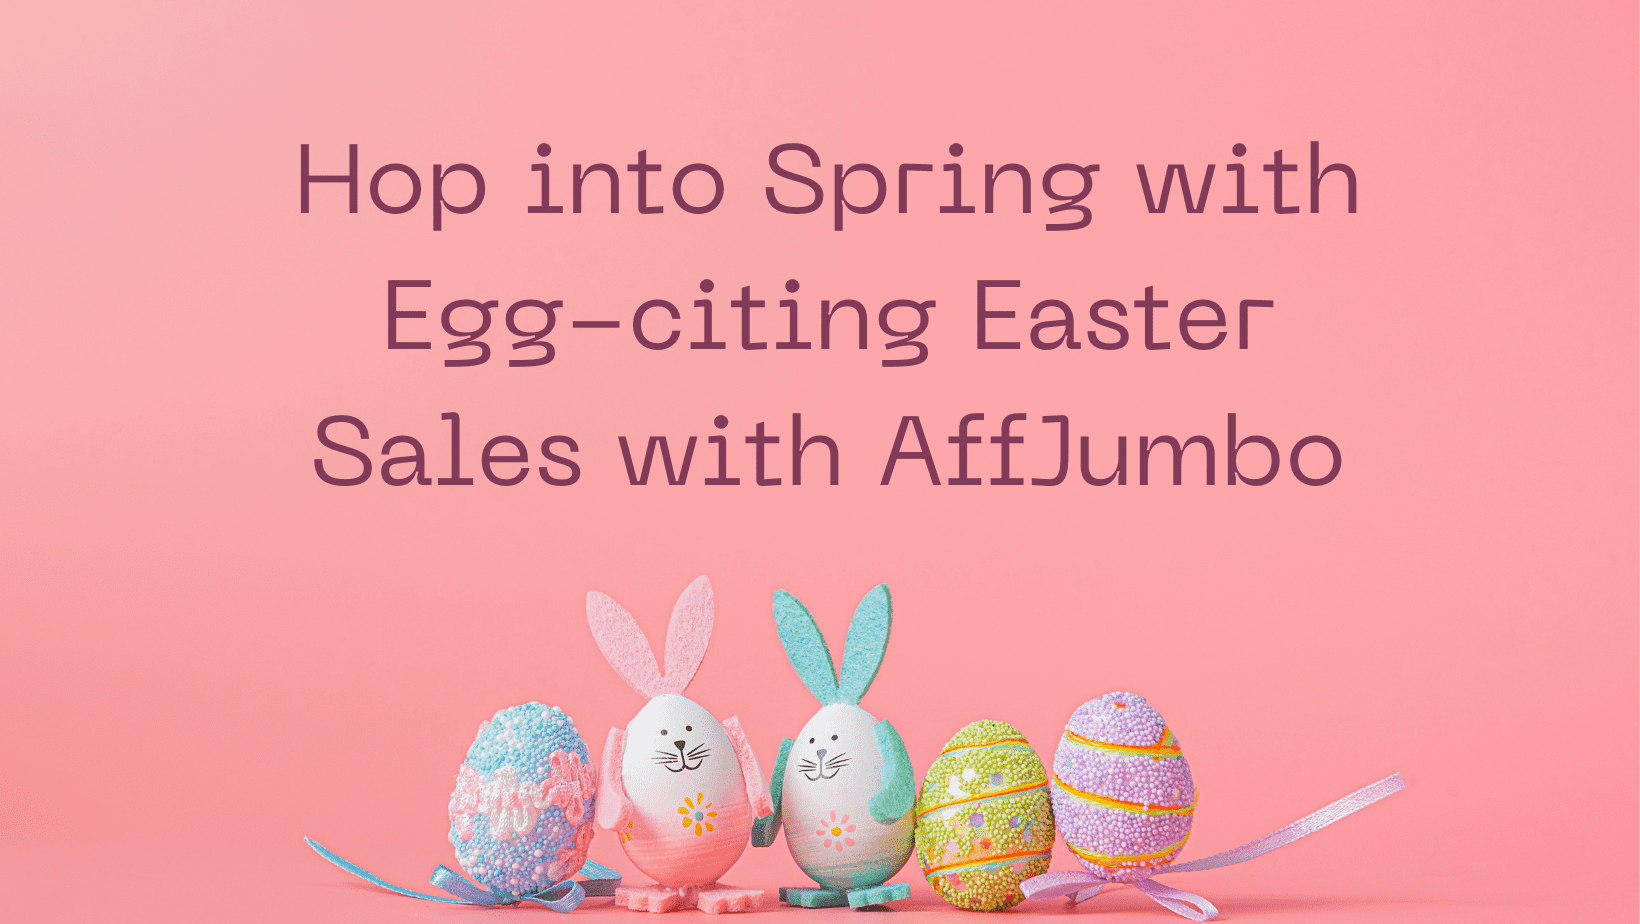 Hop into Spring with Egg-citing Easter Sales with AffJumbo